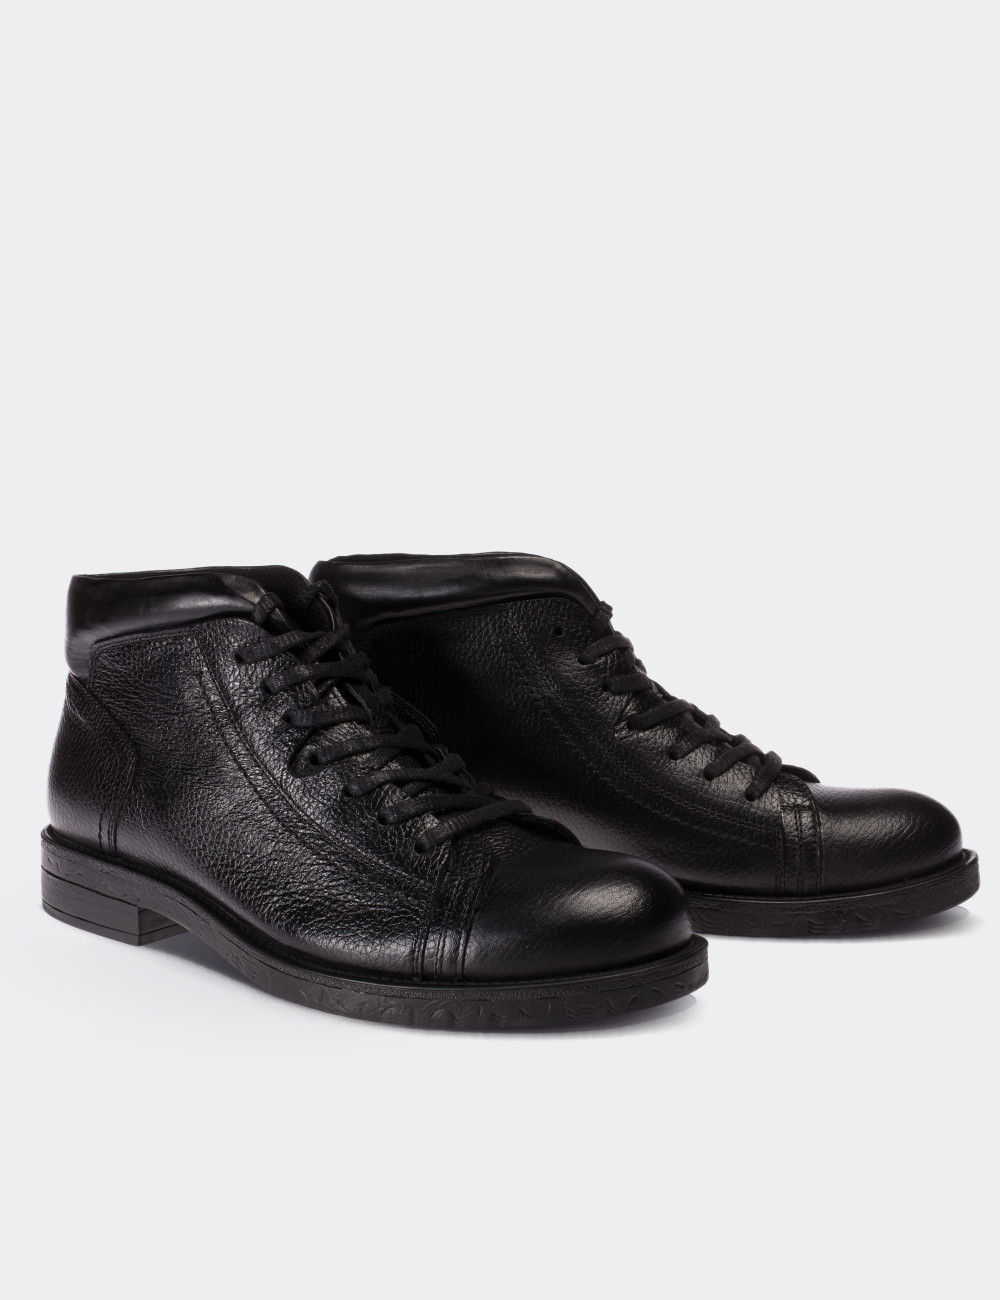 Black  Leather Boots - 01630MSYHC01